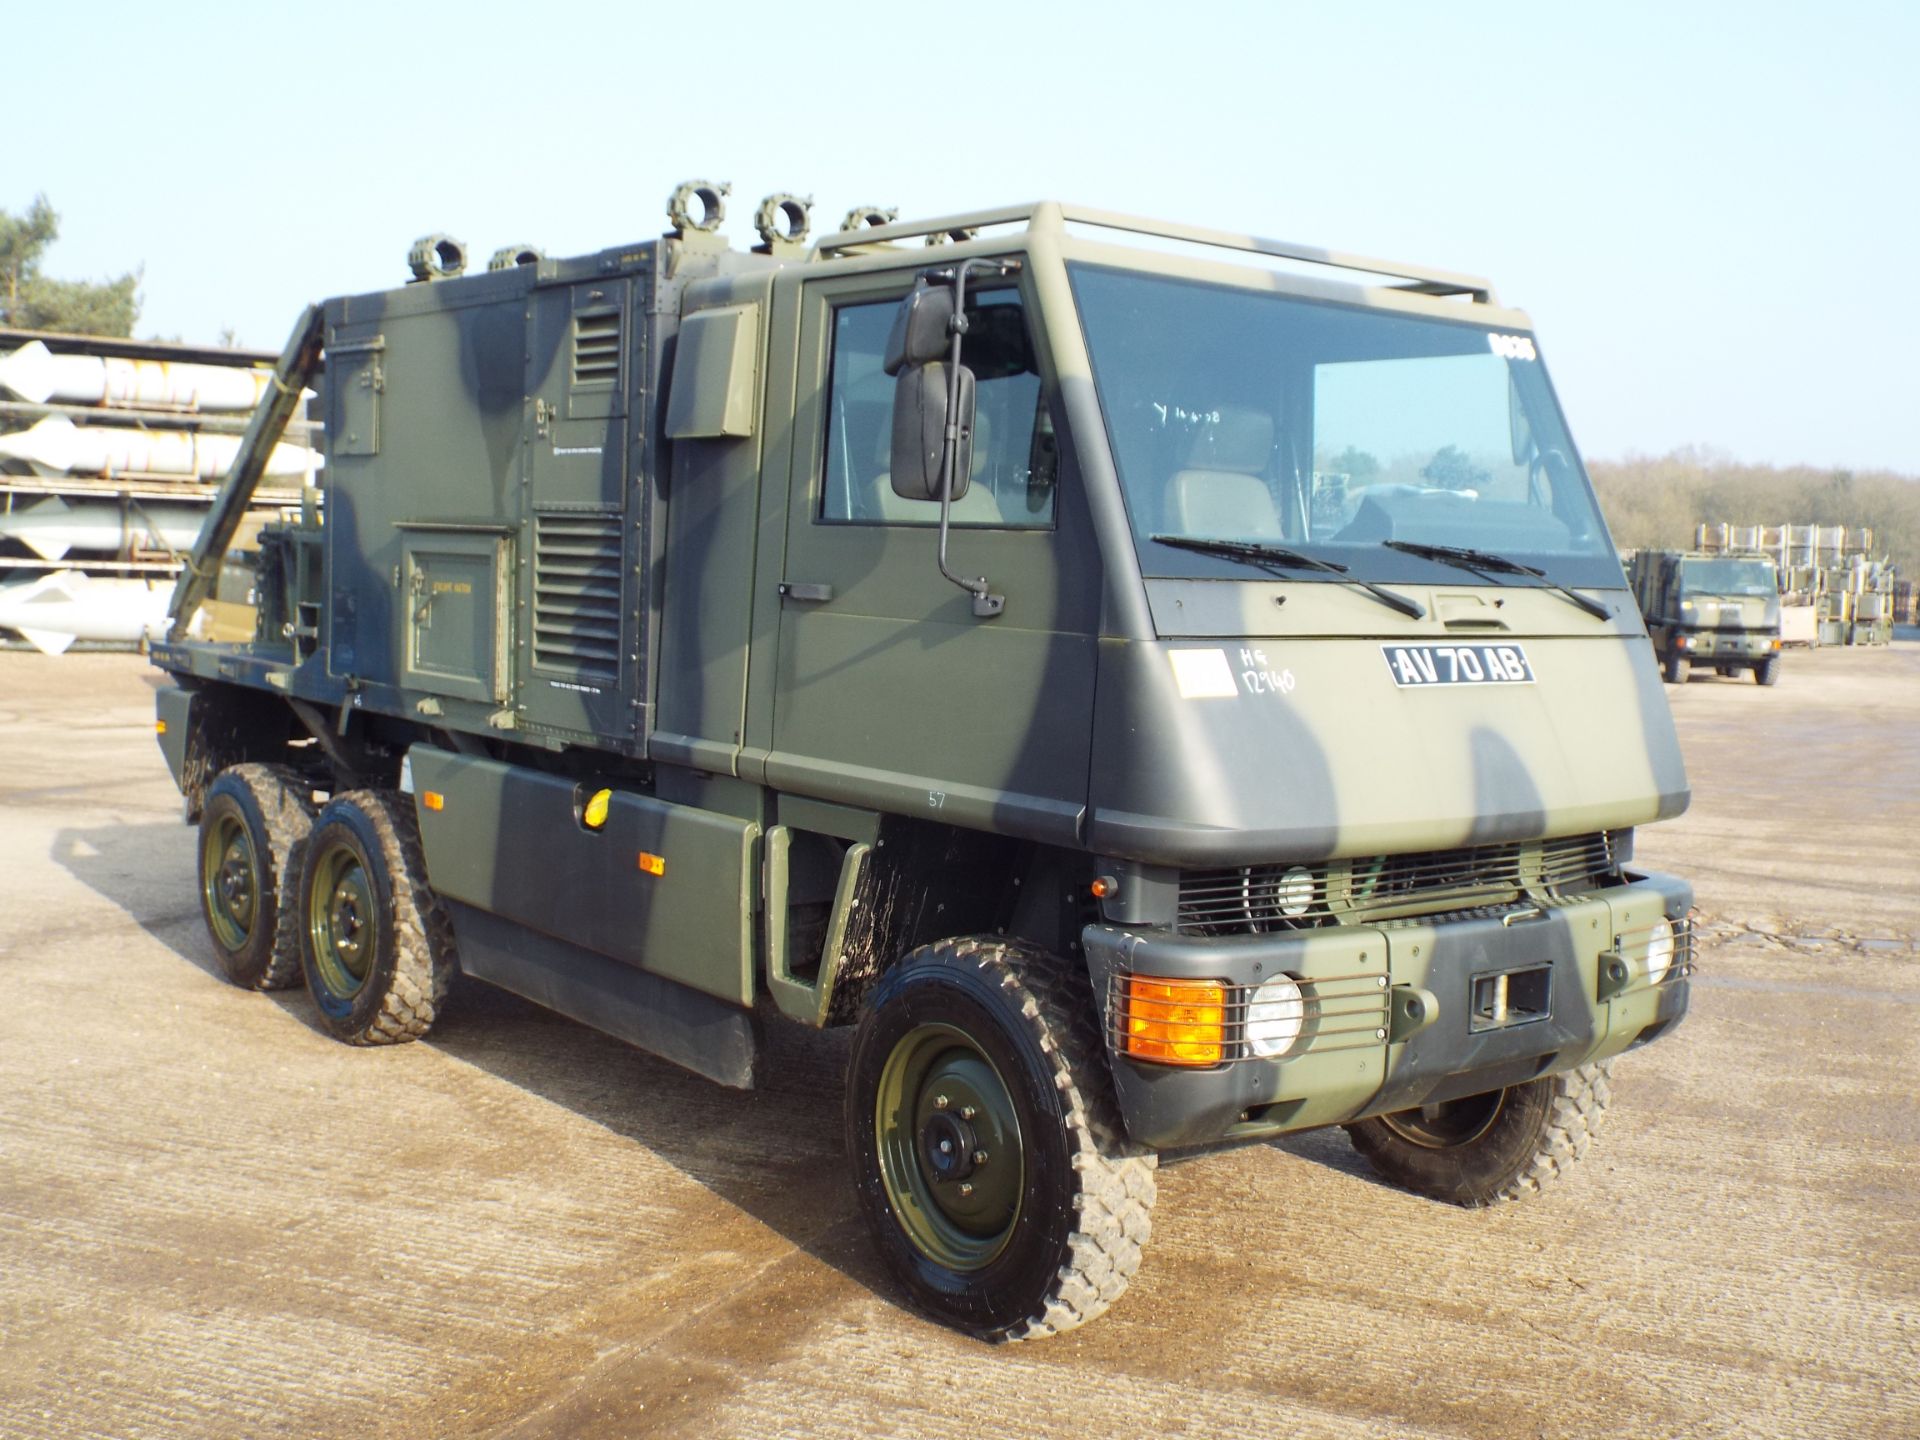 Ex Reserve Left Hand Drive Mowag Bucher Duro II 6x6 High-Mobility Tactical Vehicle